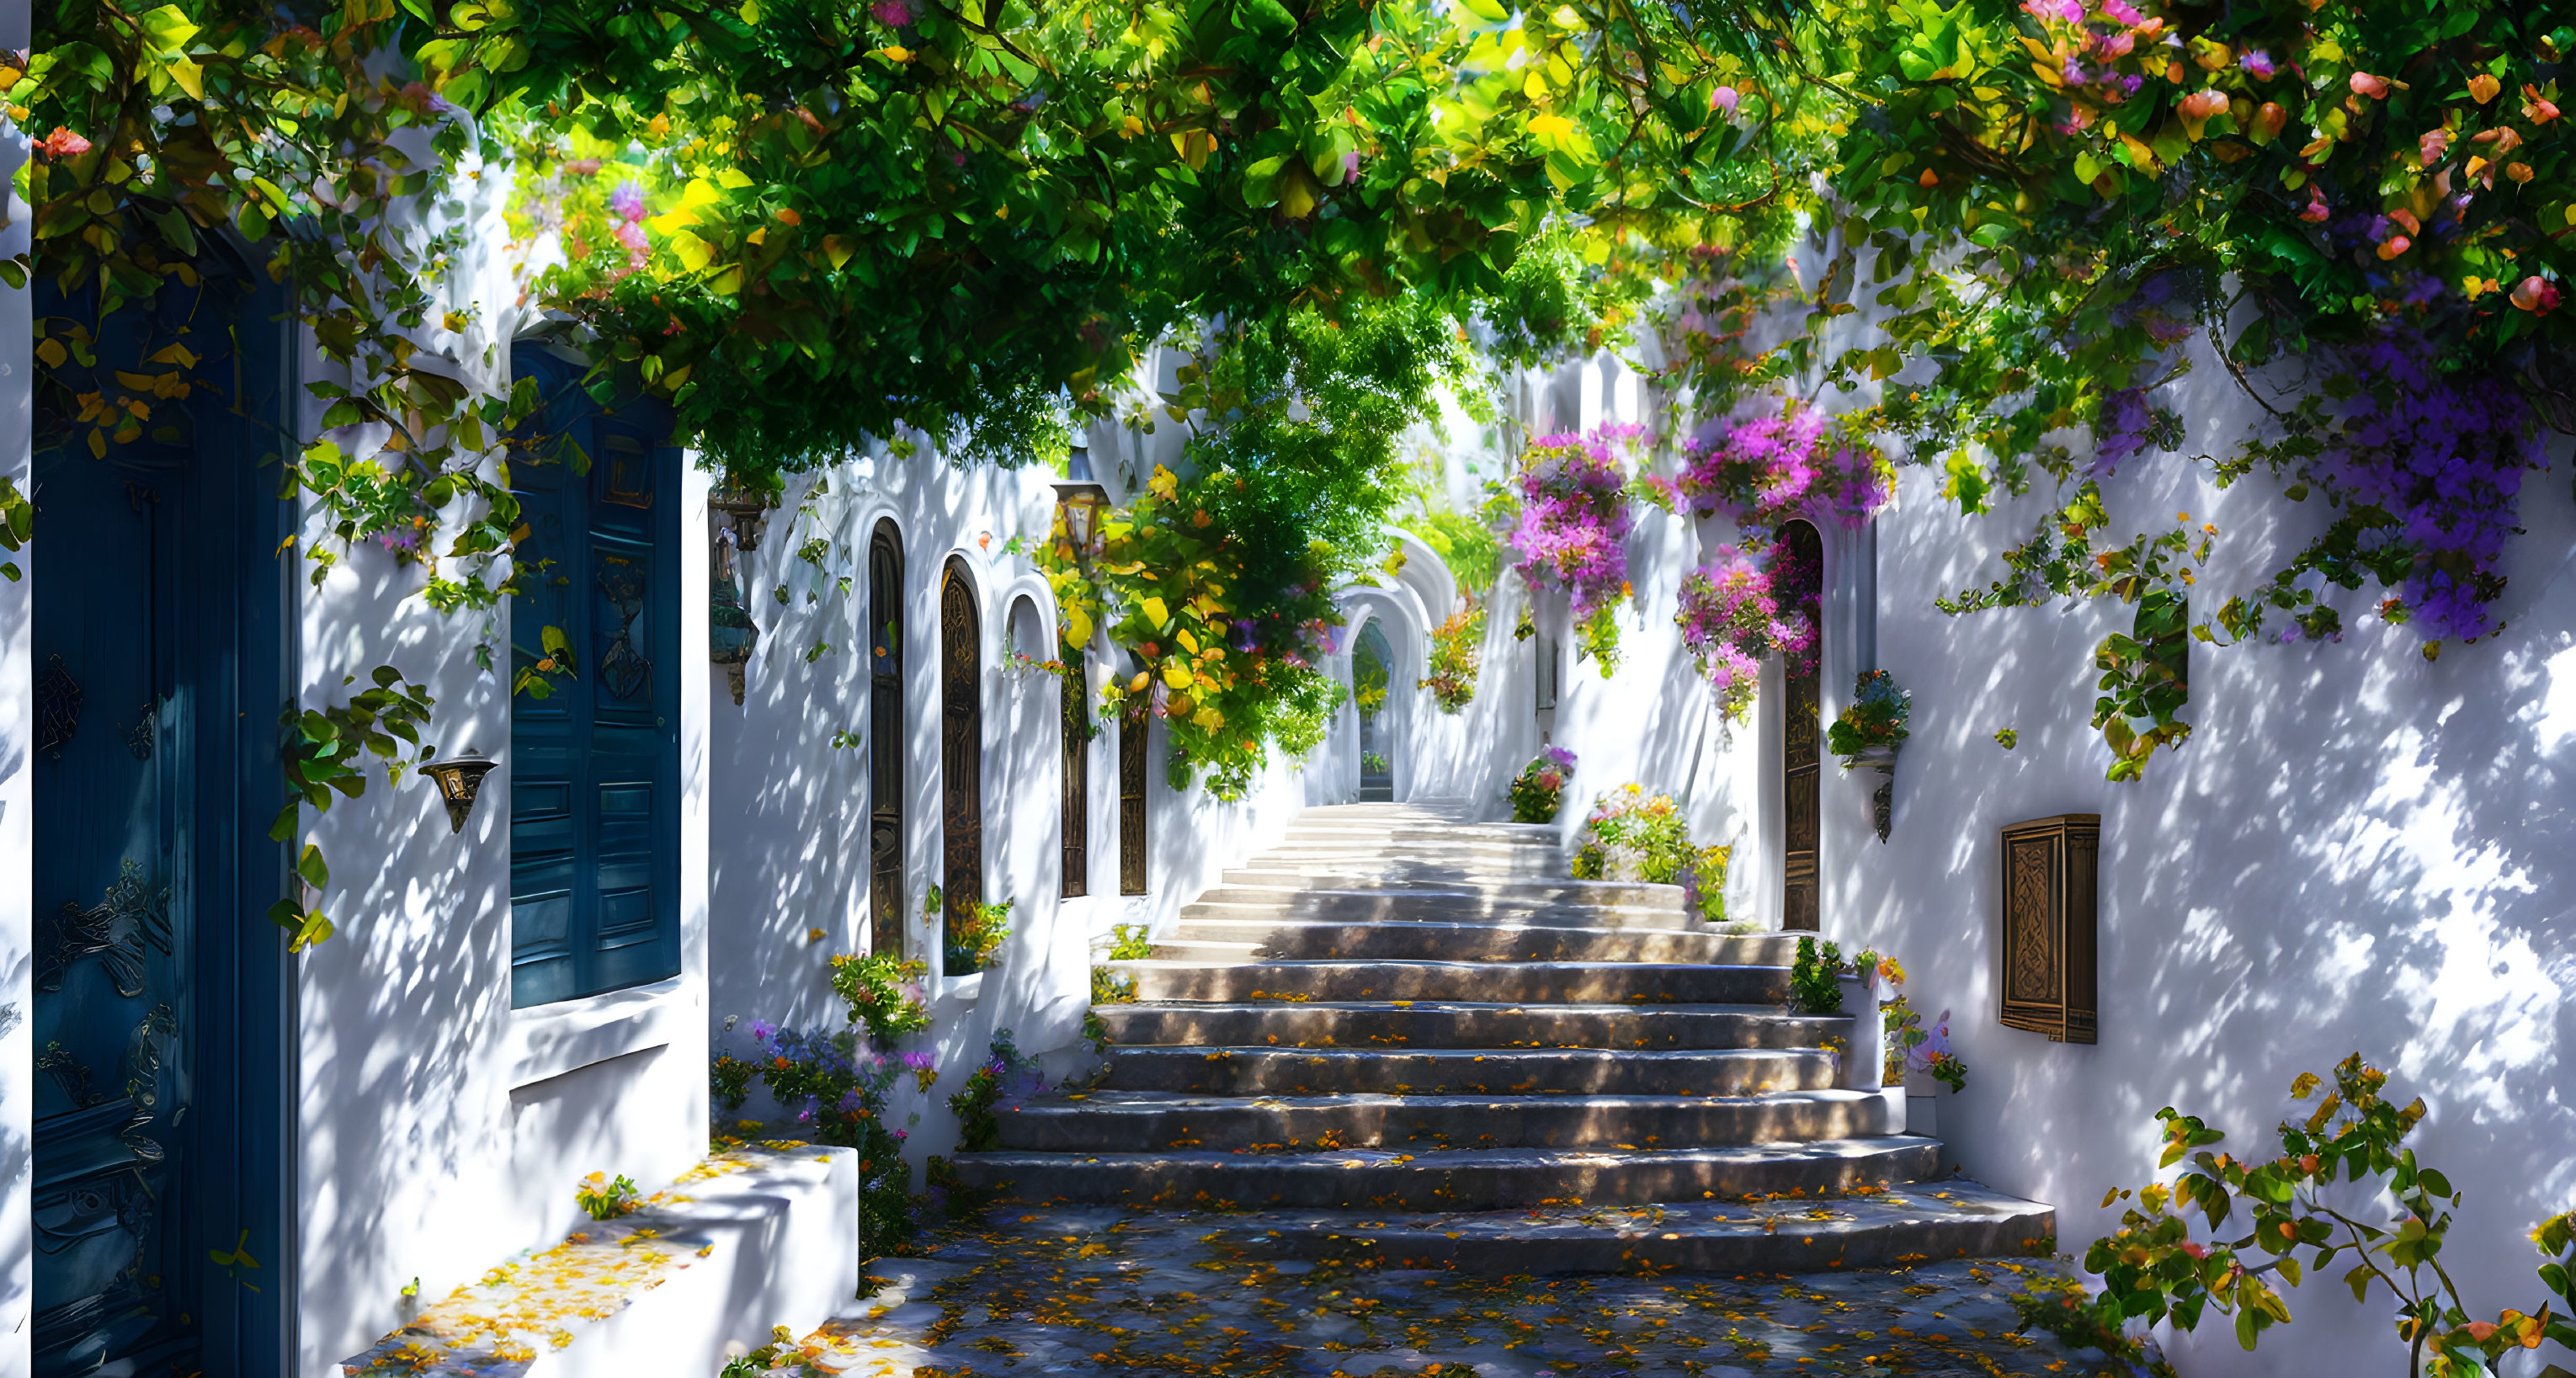 Scenic alley with white walls, blue doors, cobblestones, archway, flowers, and